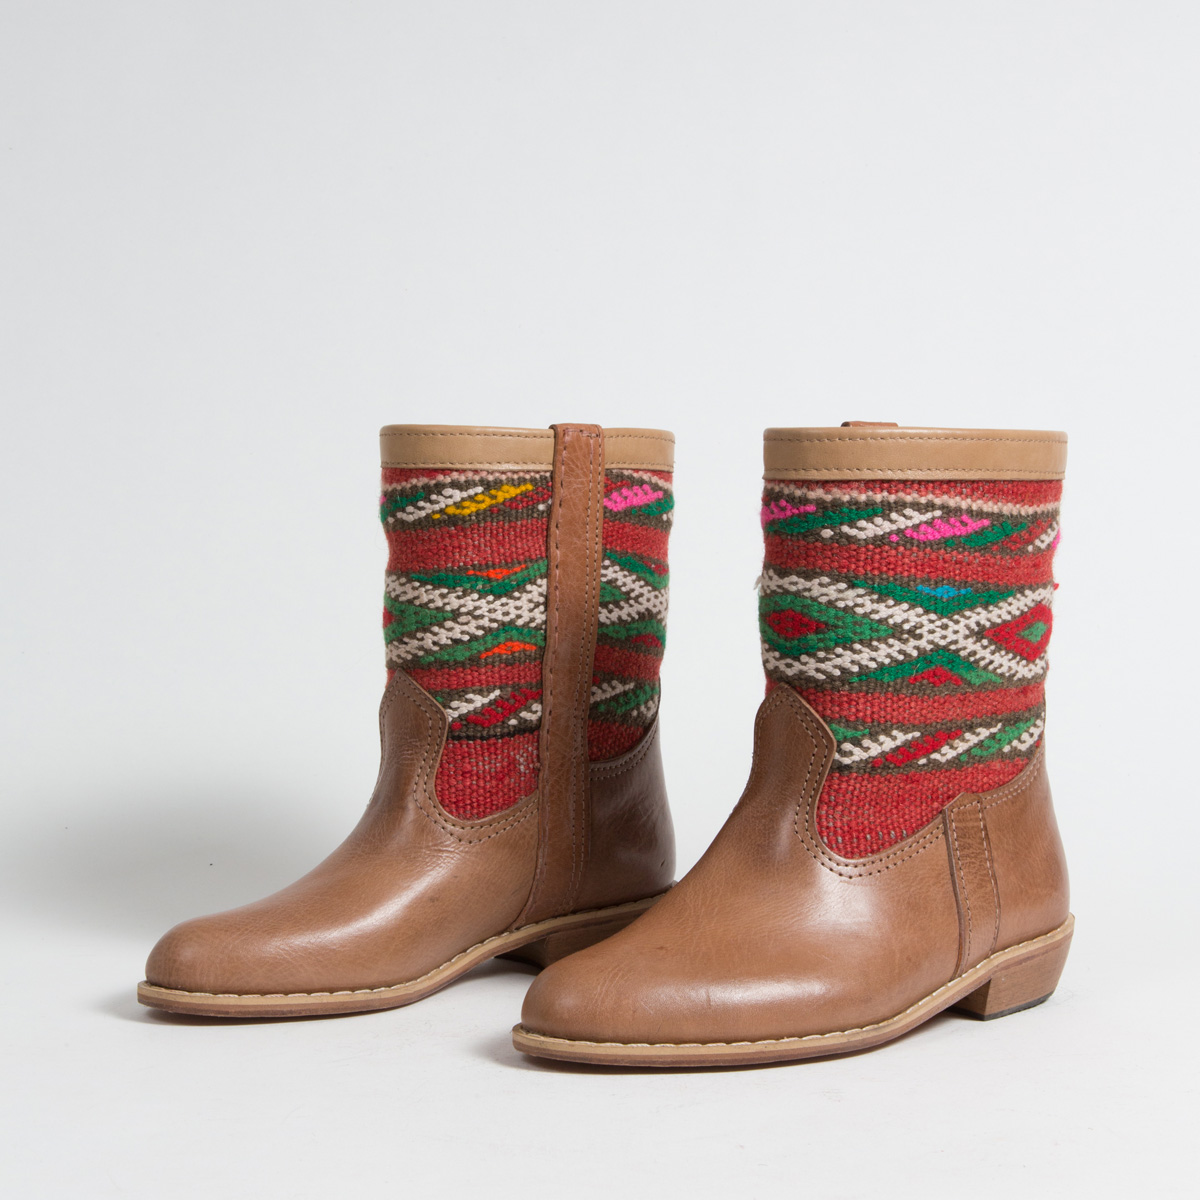 Bottines Kilim cuir mababouche artisanales (Réf. MCH1-36)